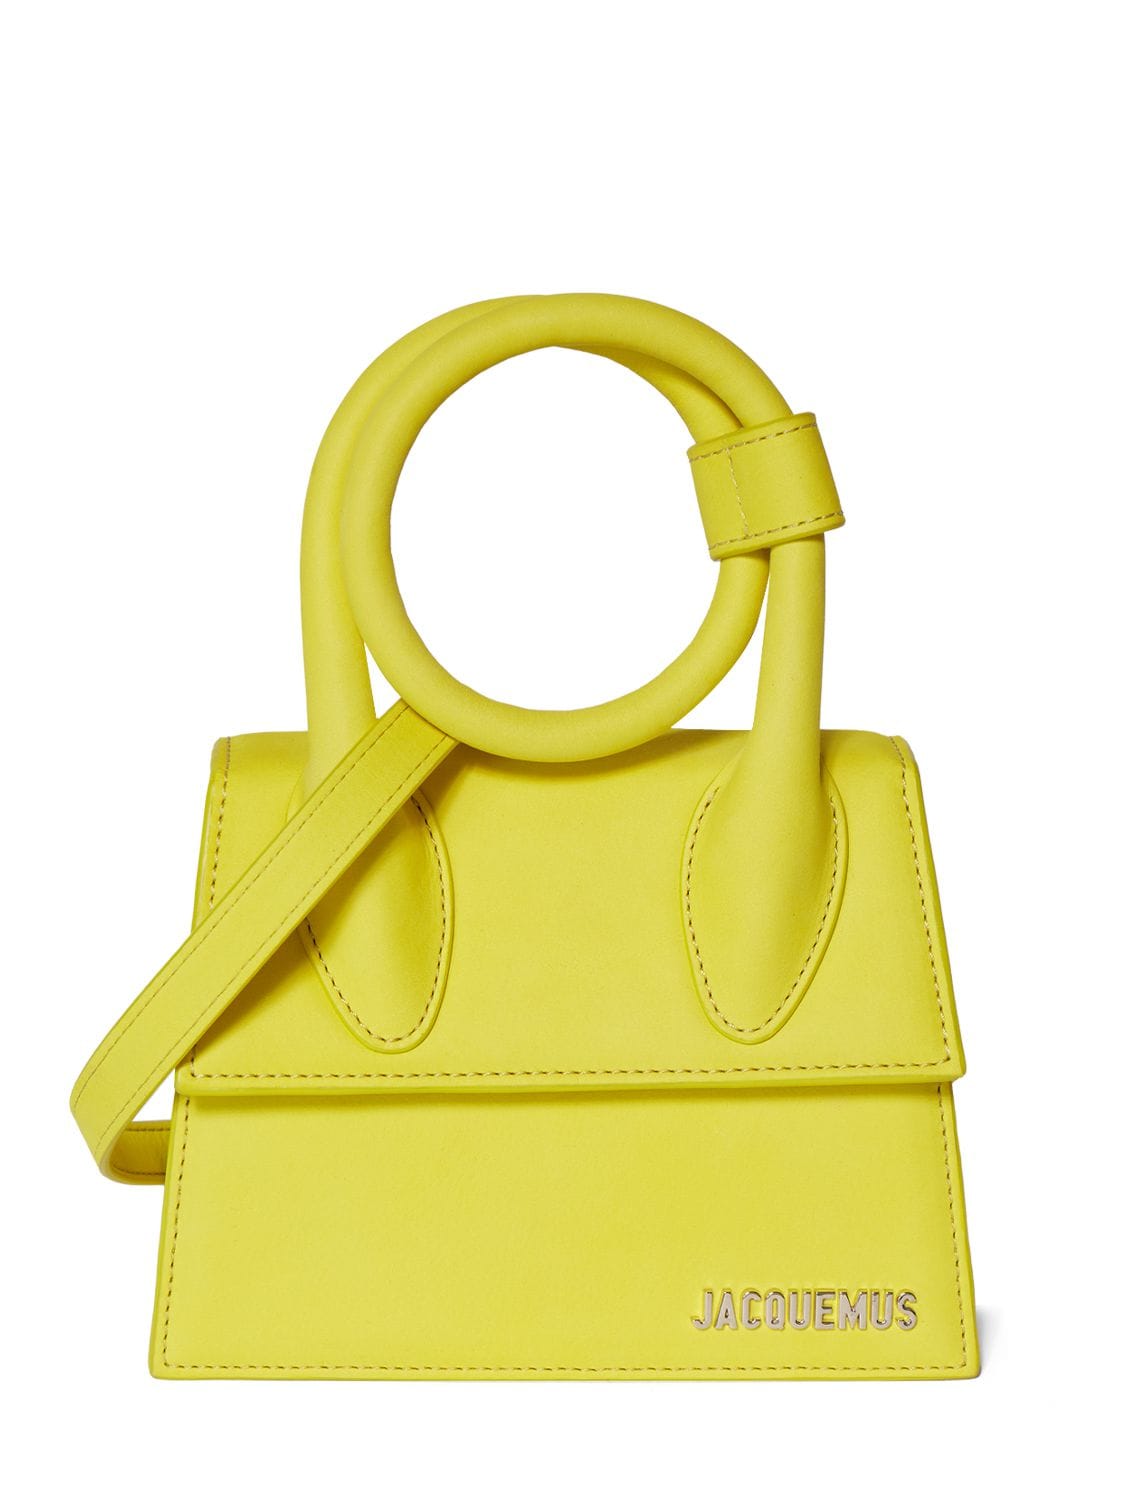 Le Chiquito Noeud Top-Handle Bag